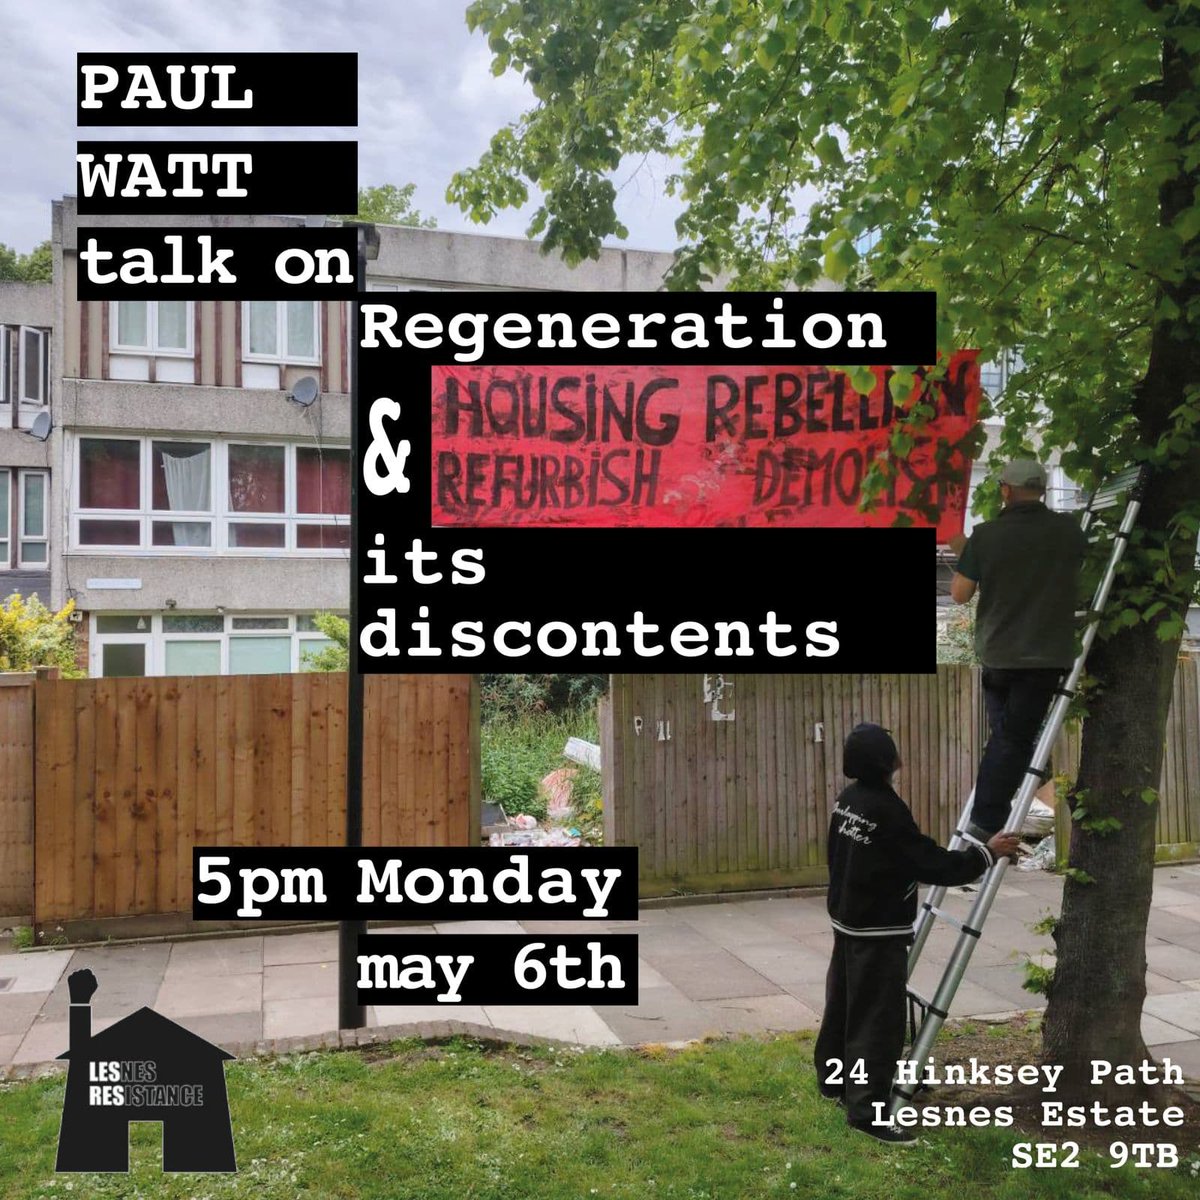 Join us at the Lesnes Estate this Monday bank holiday, where @PaulWatt1232 will be talking about regeneration & thinking with @LesRes_TM about how to fight destructive schemes. @XRLondon @Aylesbury_exhib @ArchitectsCAN @EstateWatch_LDN @emptyhomes @homes4